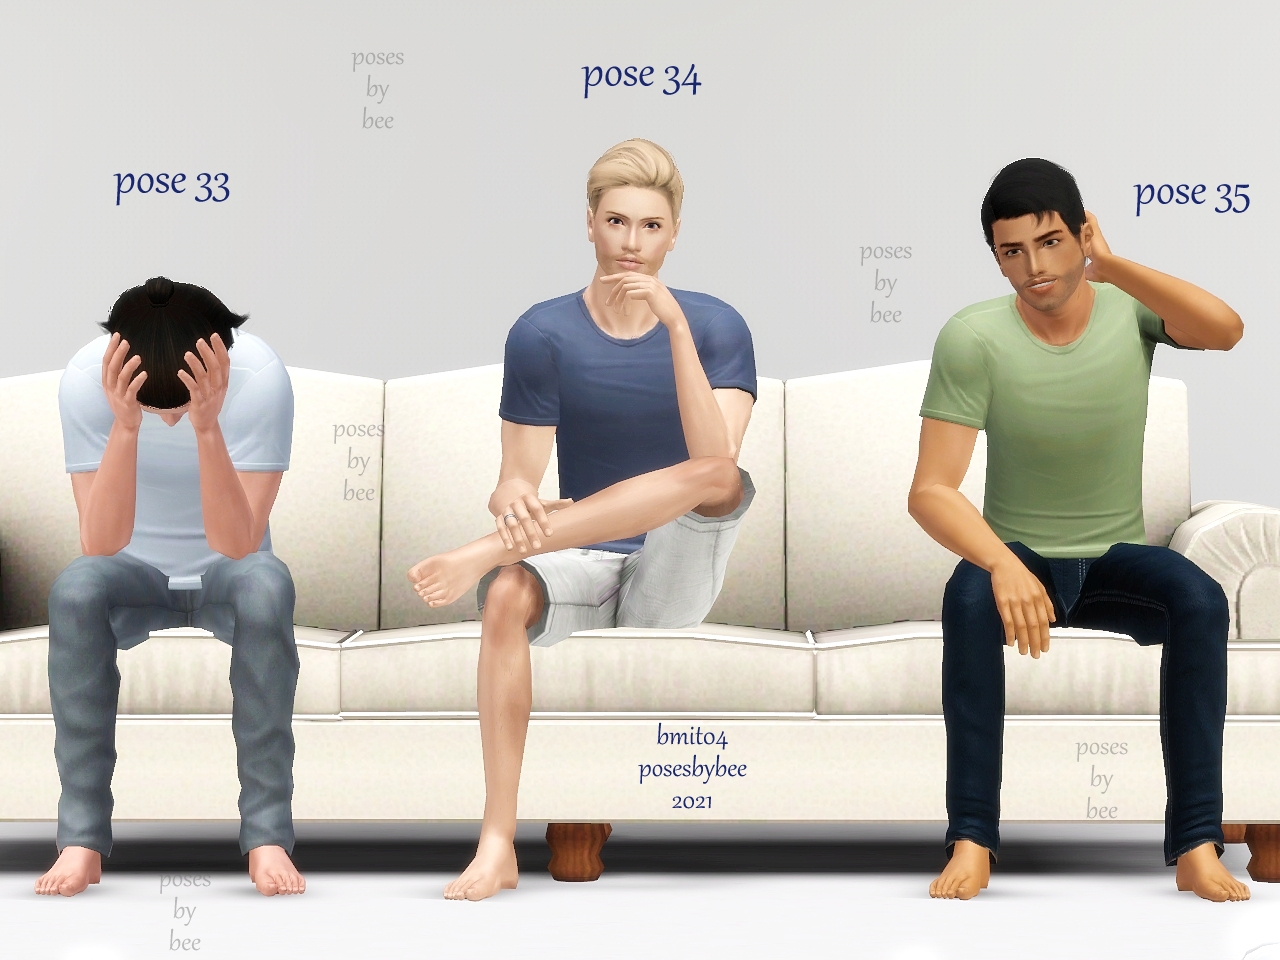 Sims 4 Selfie Poses: Strike The Perfect Pose - We Want Mods